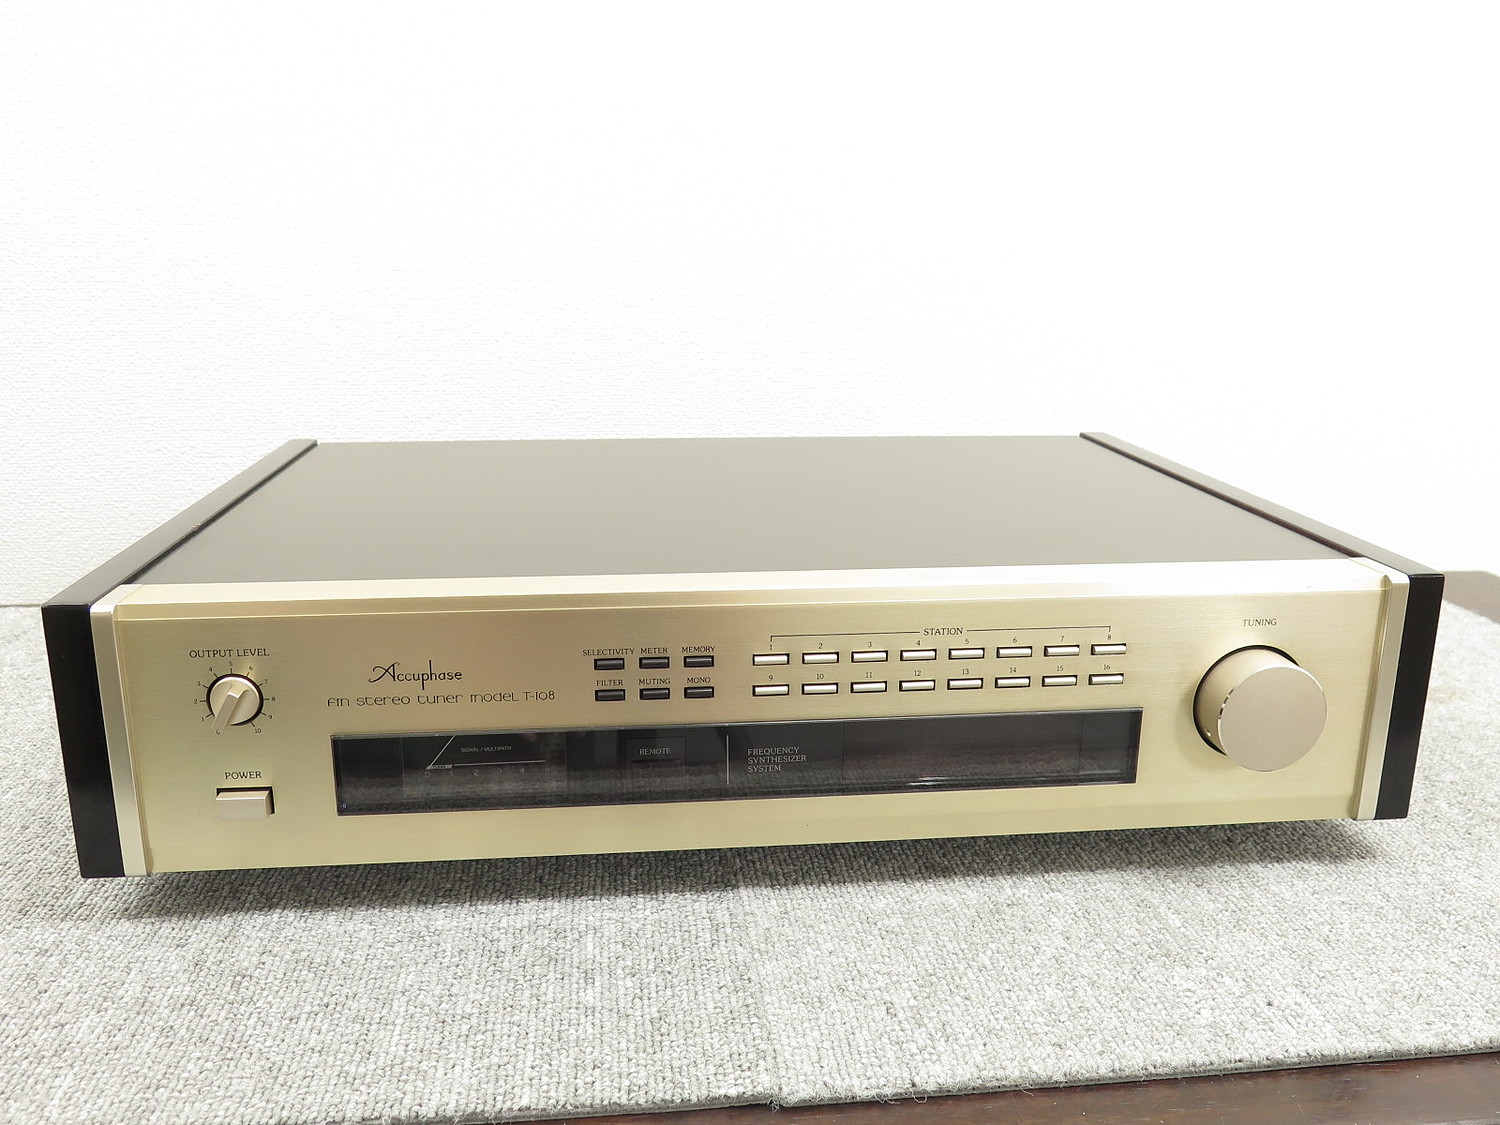 Aランク】アキュフェーズ Accuphase T-108 チューナー @49546 / 中古